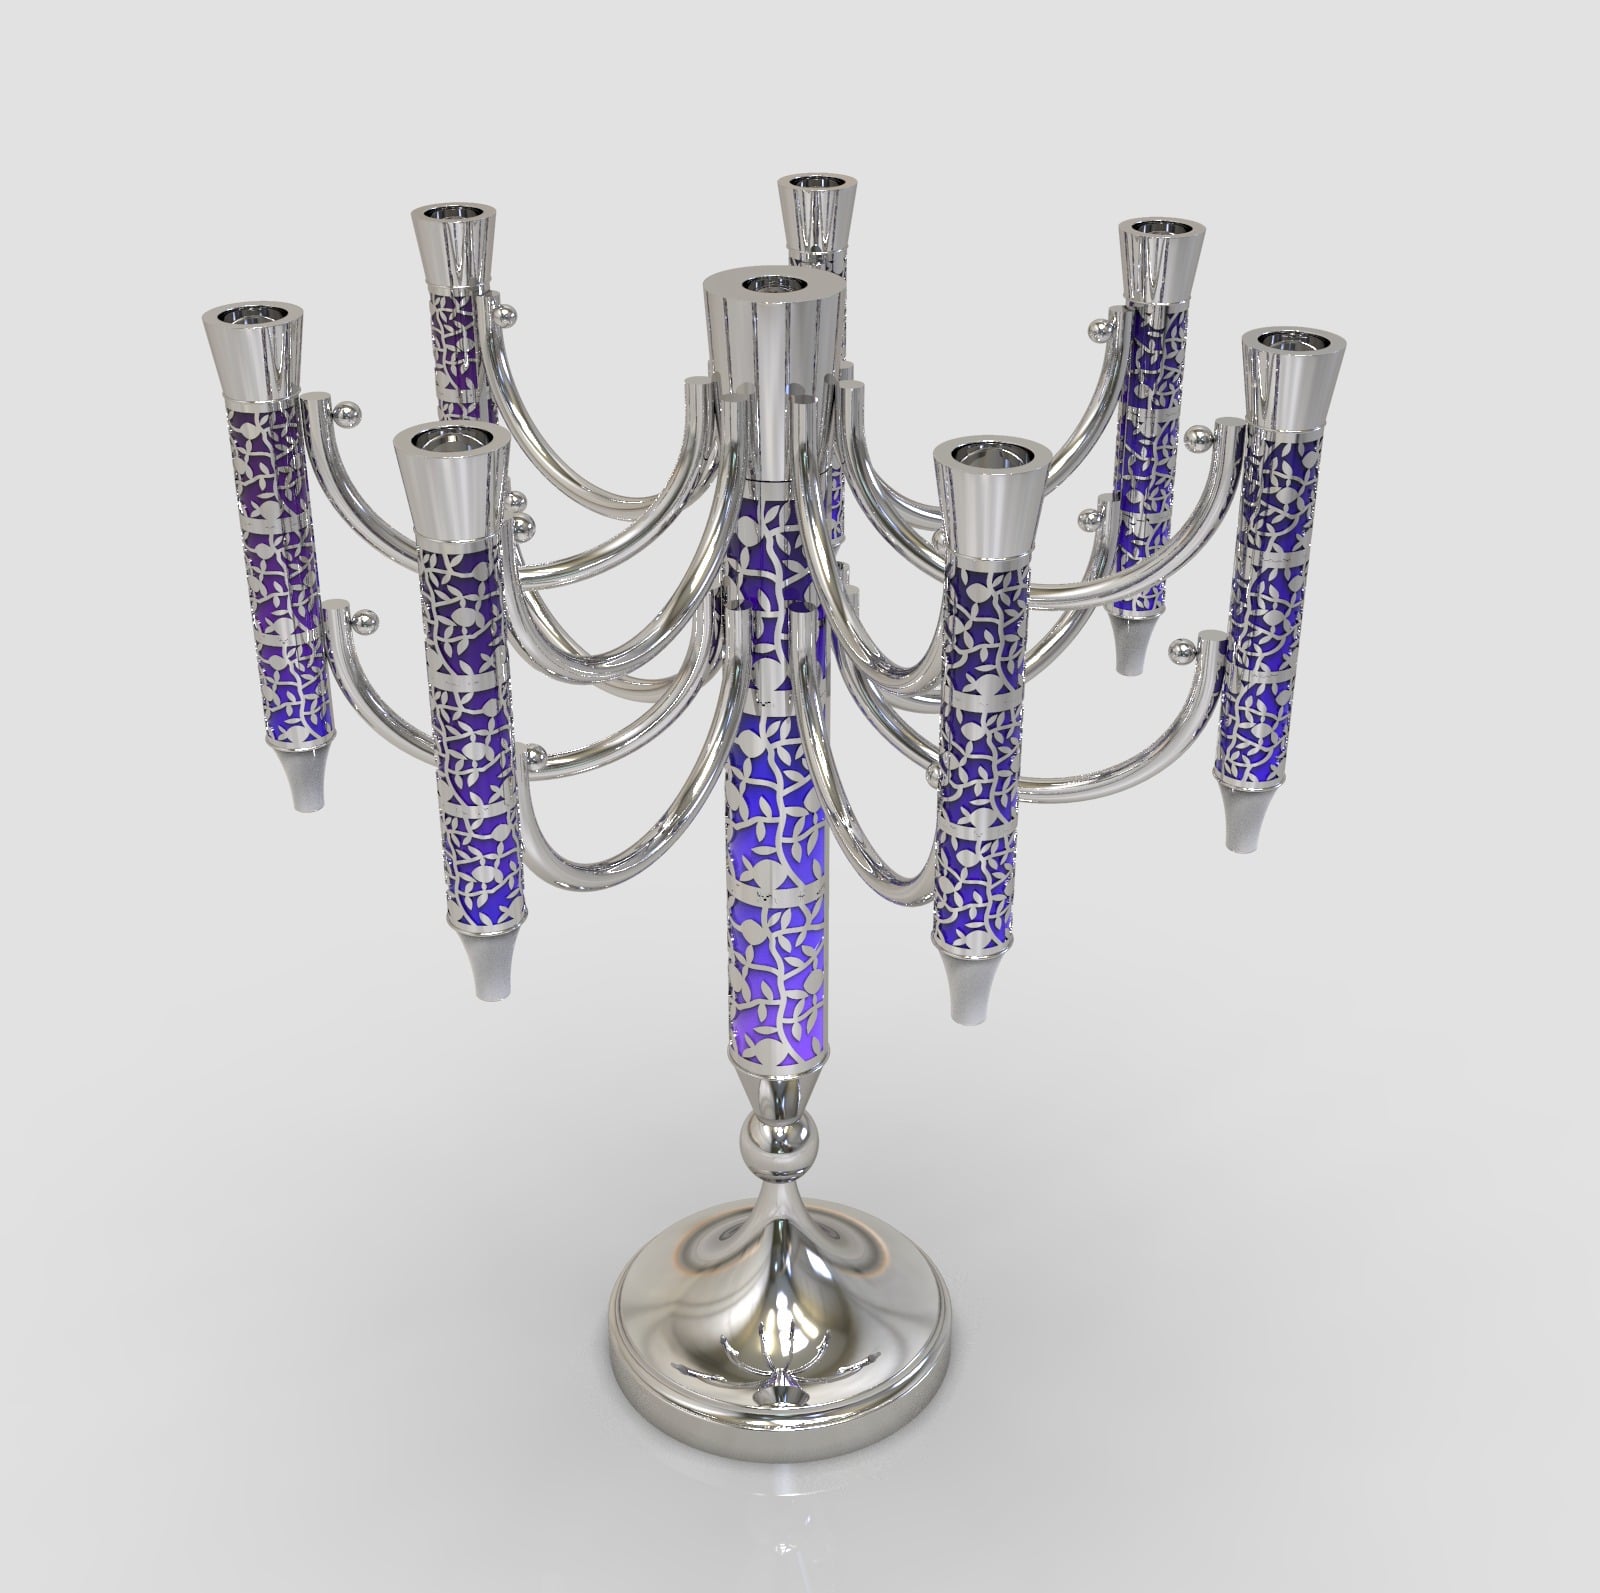 Colorful Silver Candlesticks with Cut Out Design